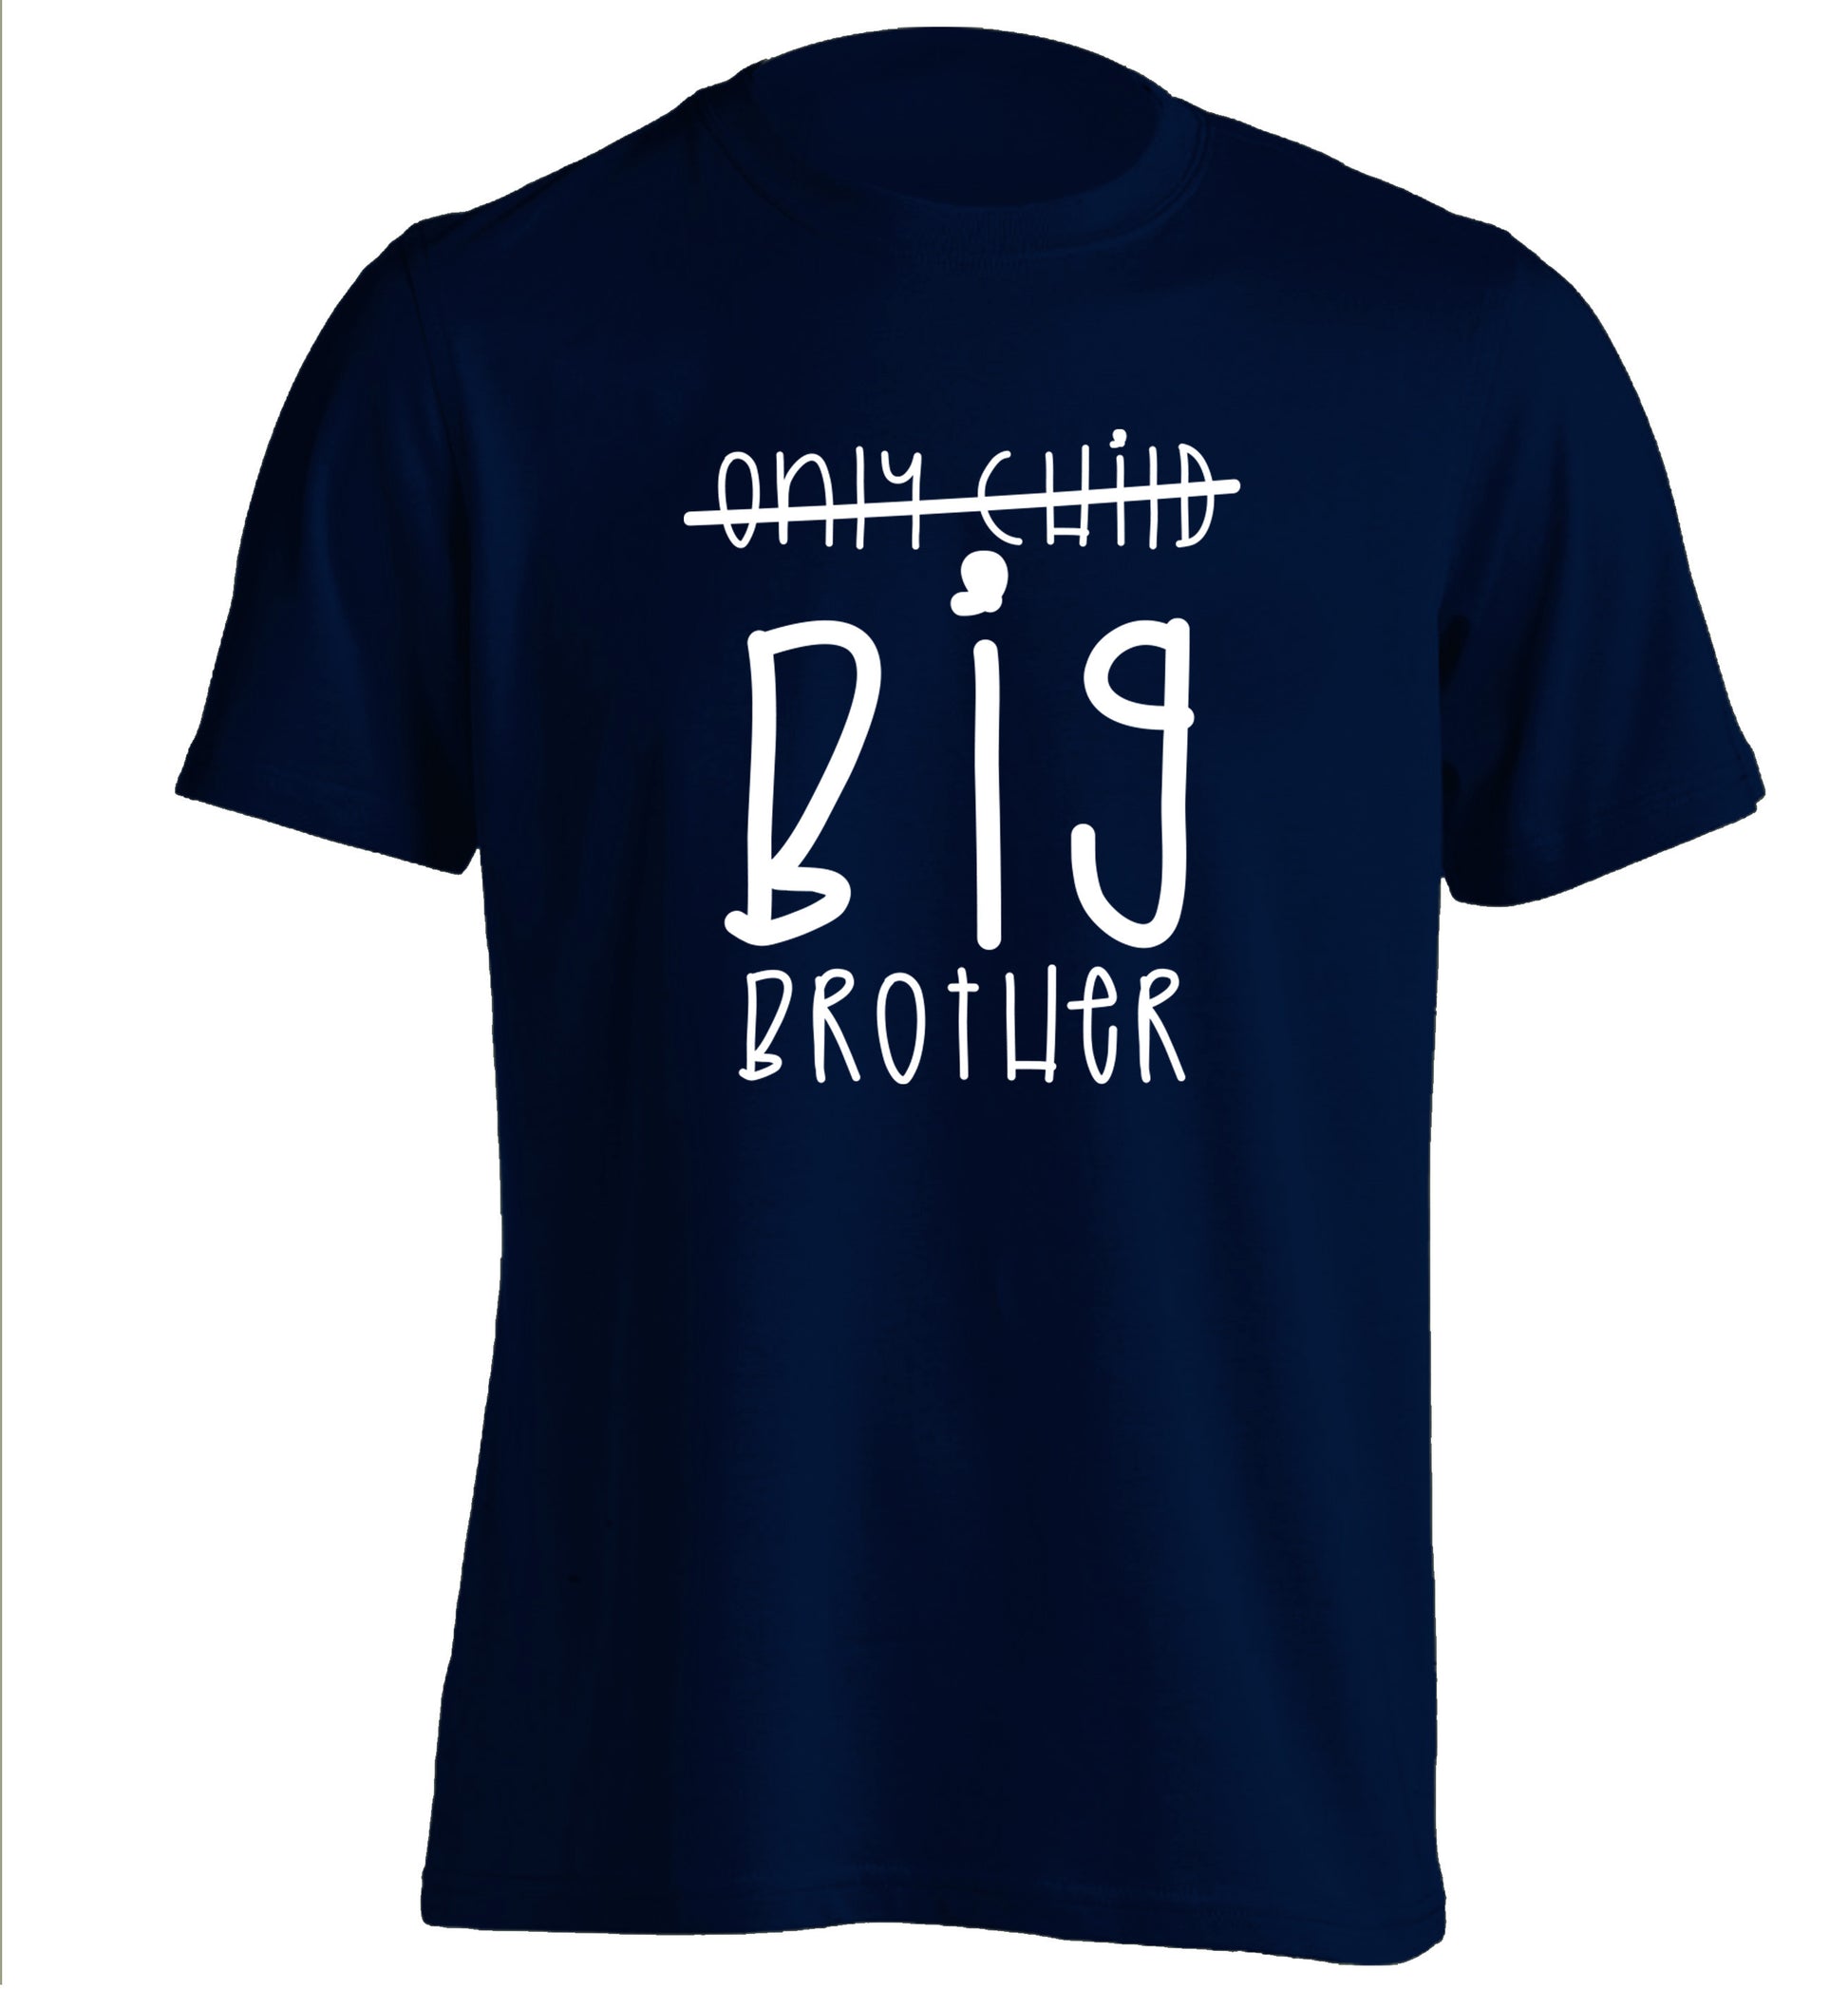 Only child big brother adults unisex navy Tshirt 2XL